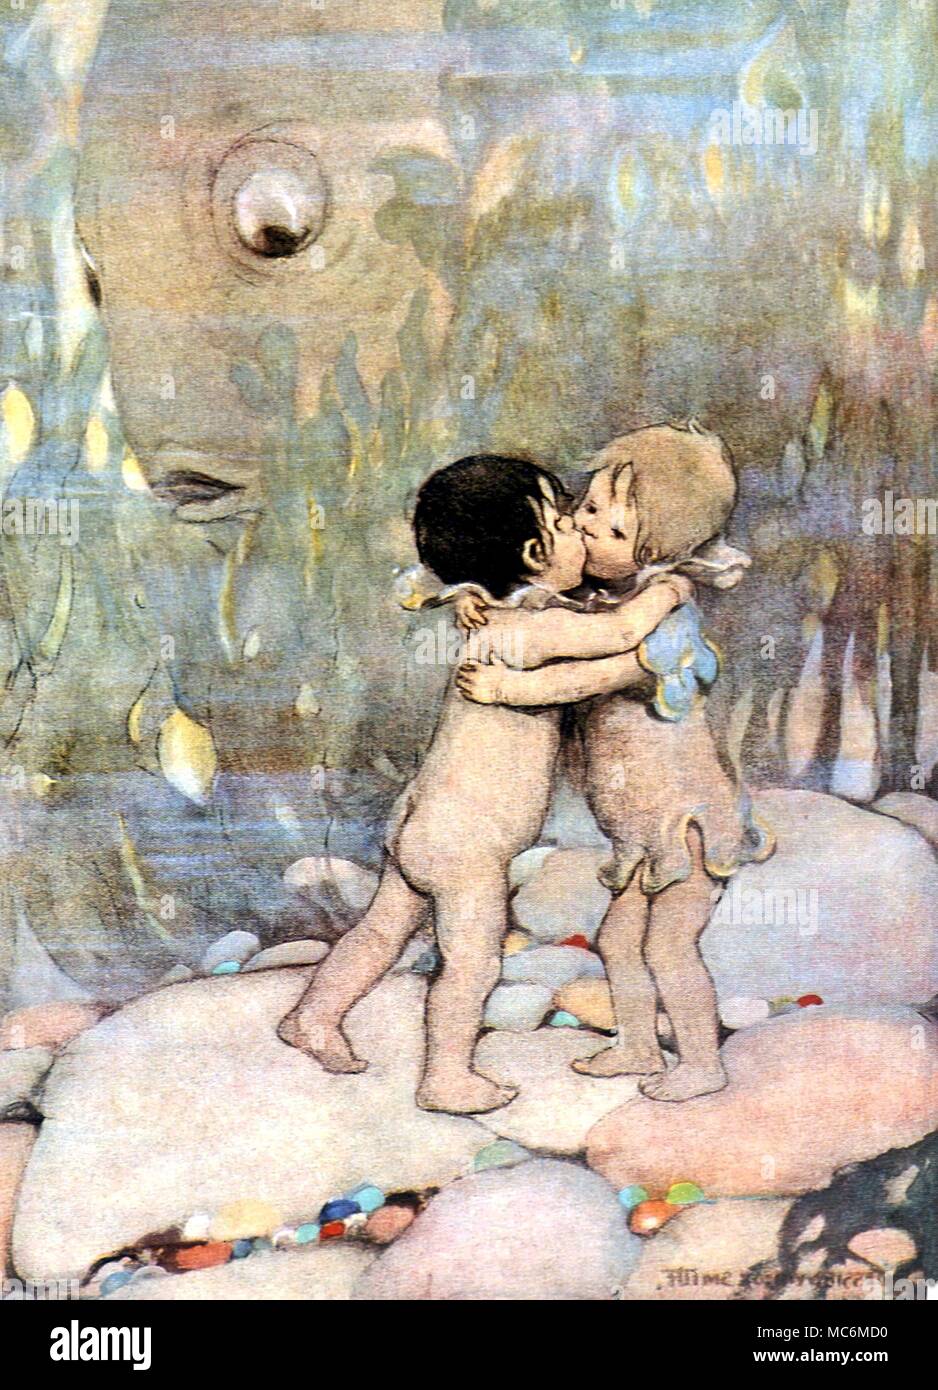 FAIRY TALES - WATER BABIES. Illustration by J W Smith for Charles Kingsley's The Water Babies, n.d. but circa 1920. 'They hugged and kissed each other for ever so long, they did not know why.' Stock Photo